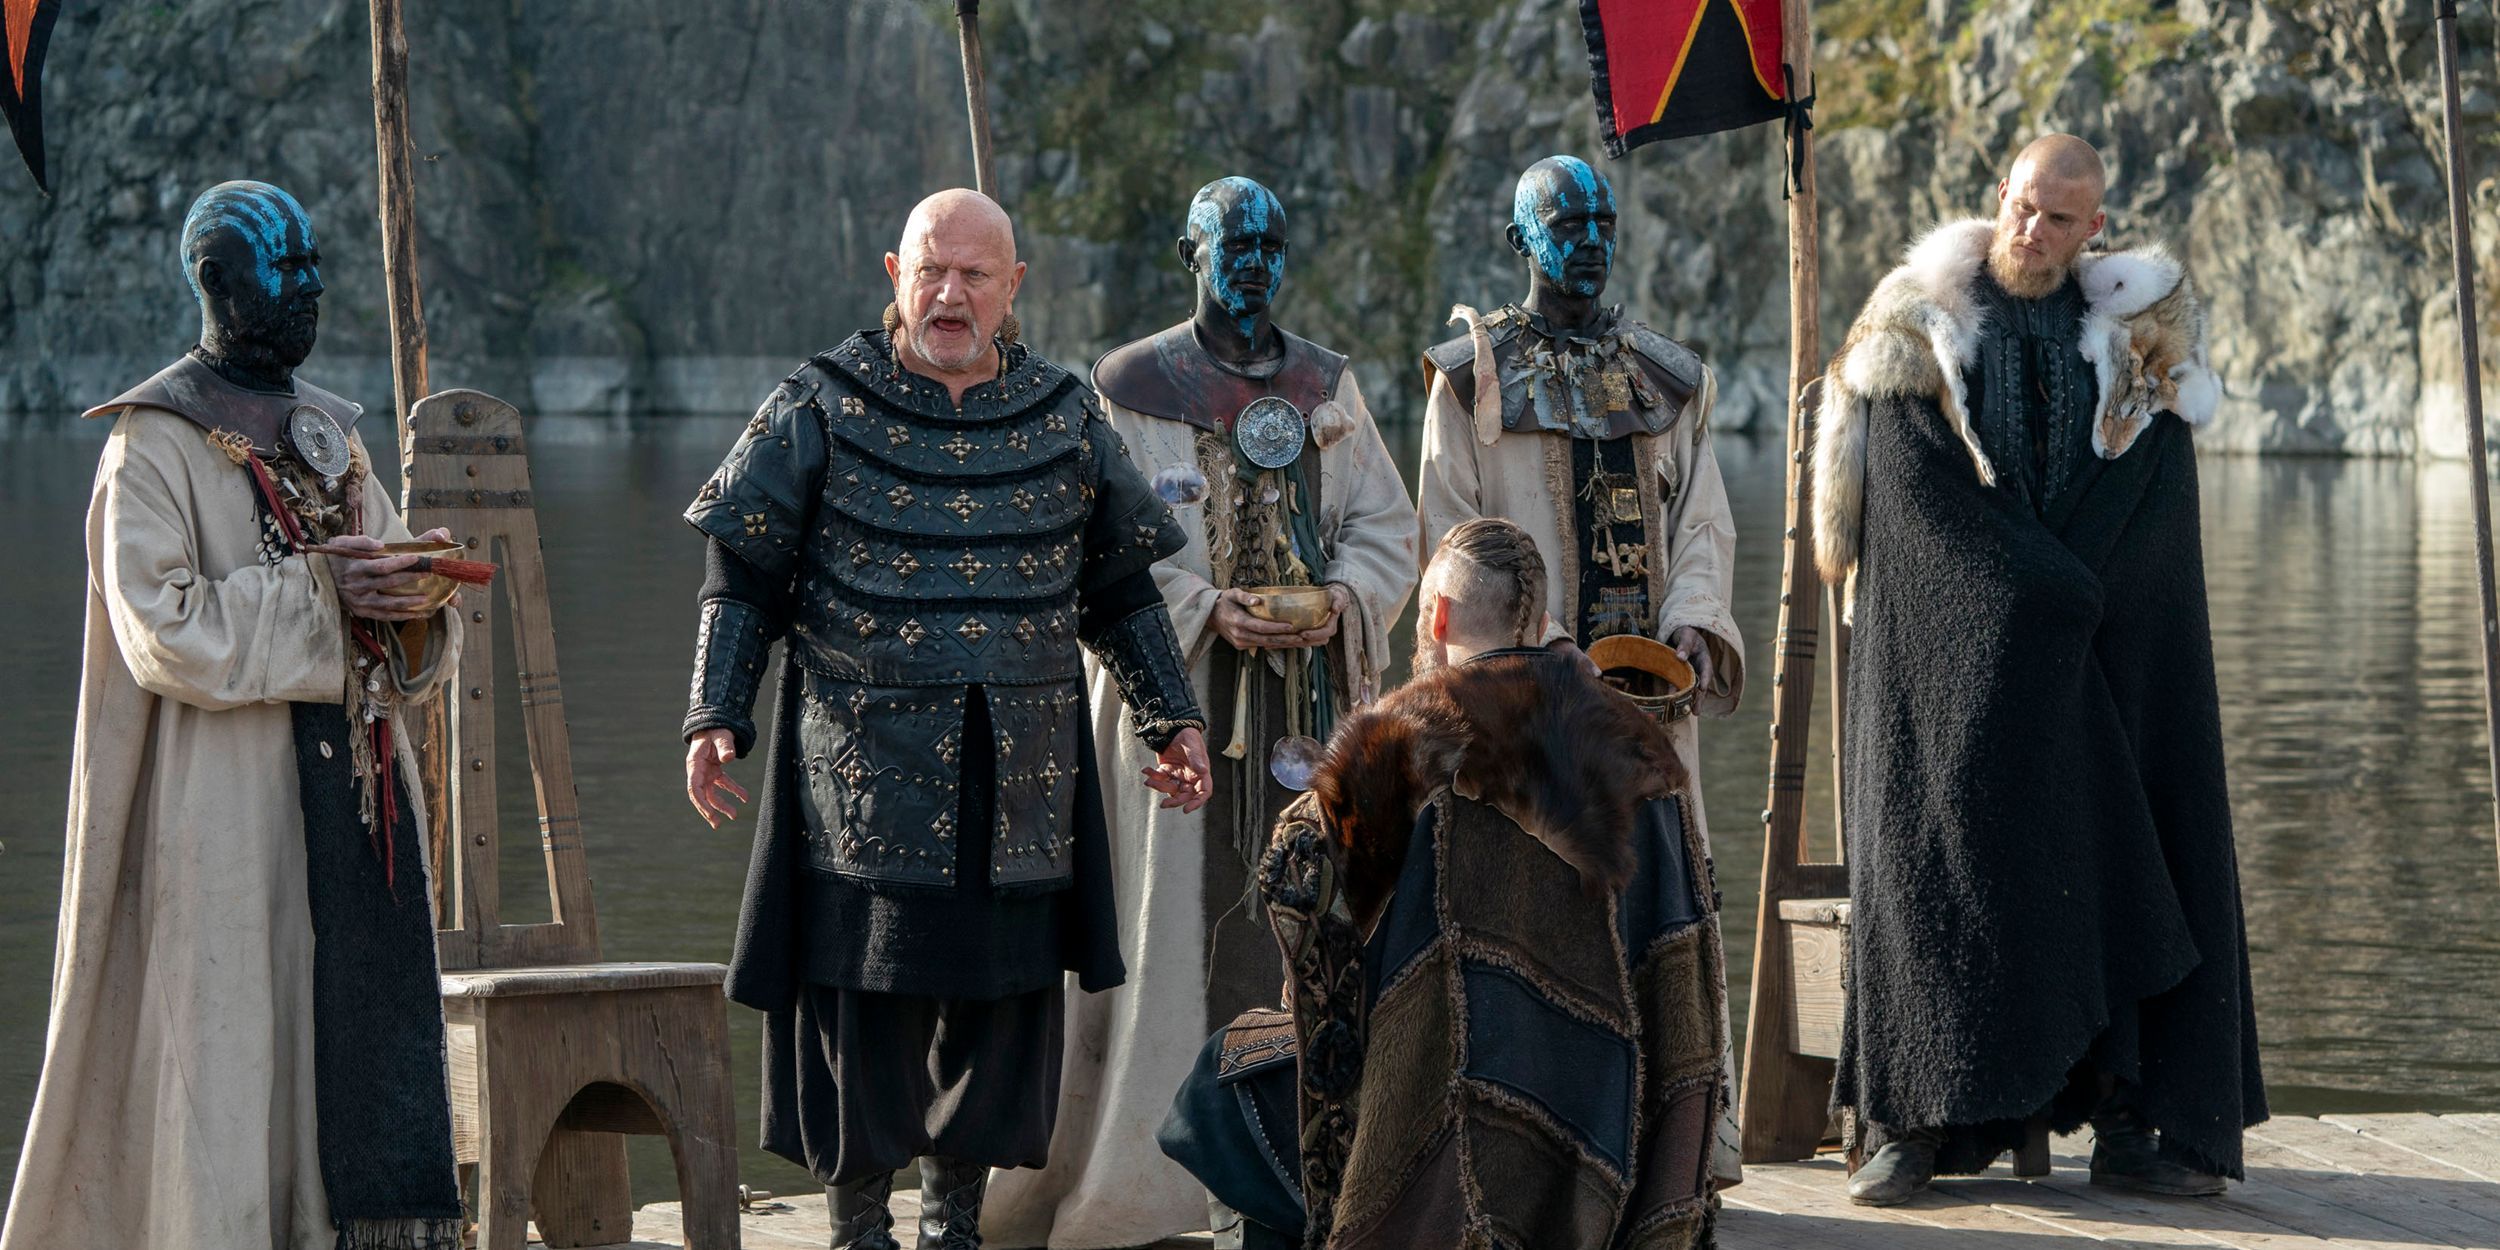 King Olaf crowns King Harald as the King of All Norway in Vikings S06